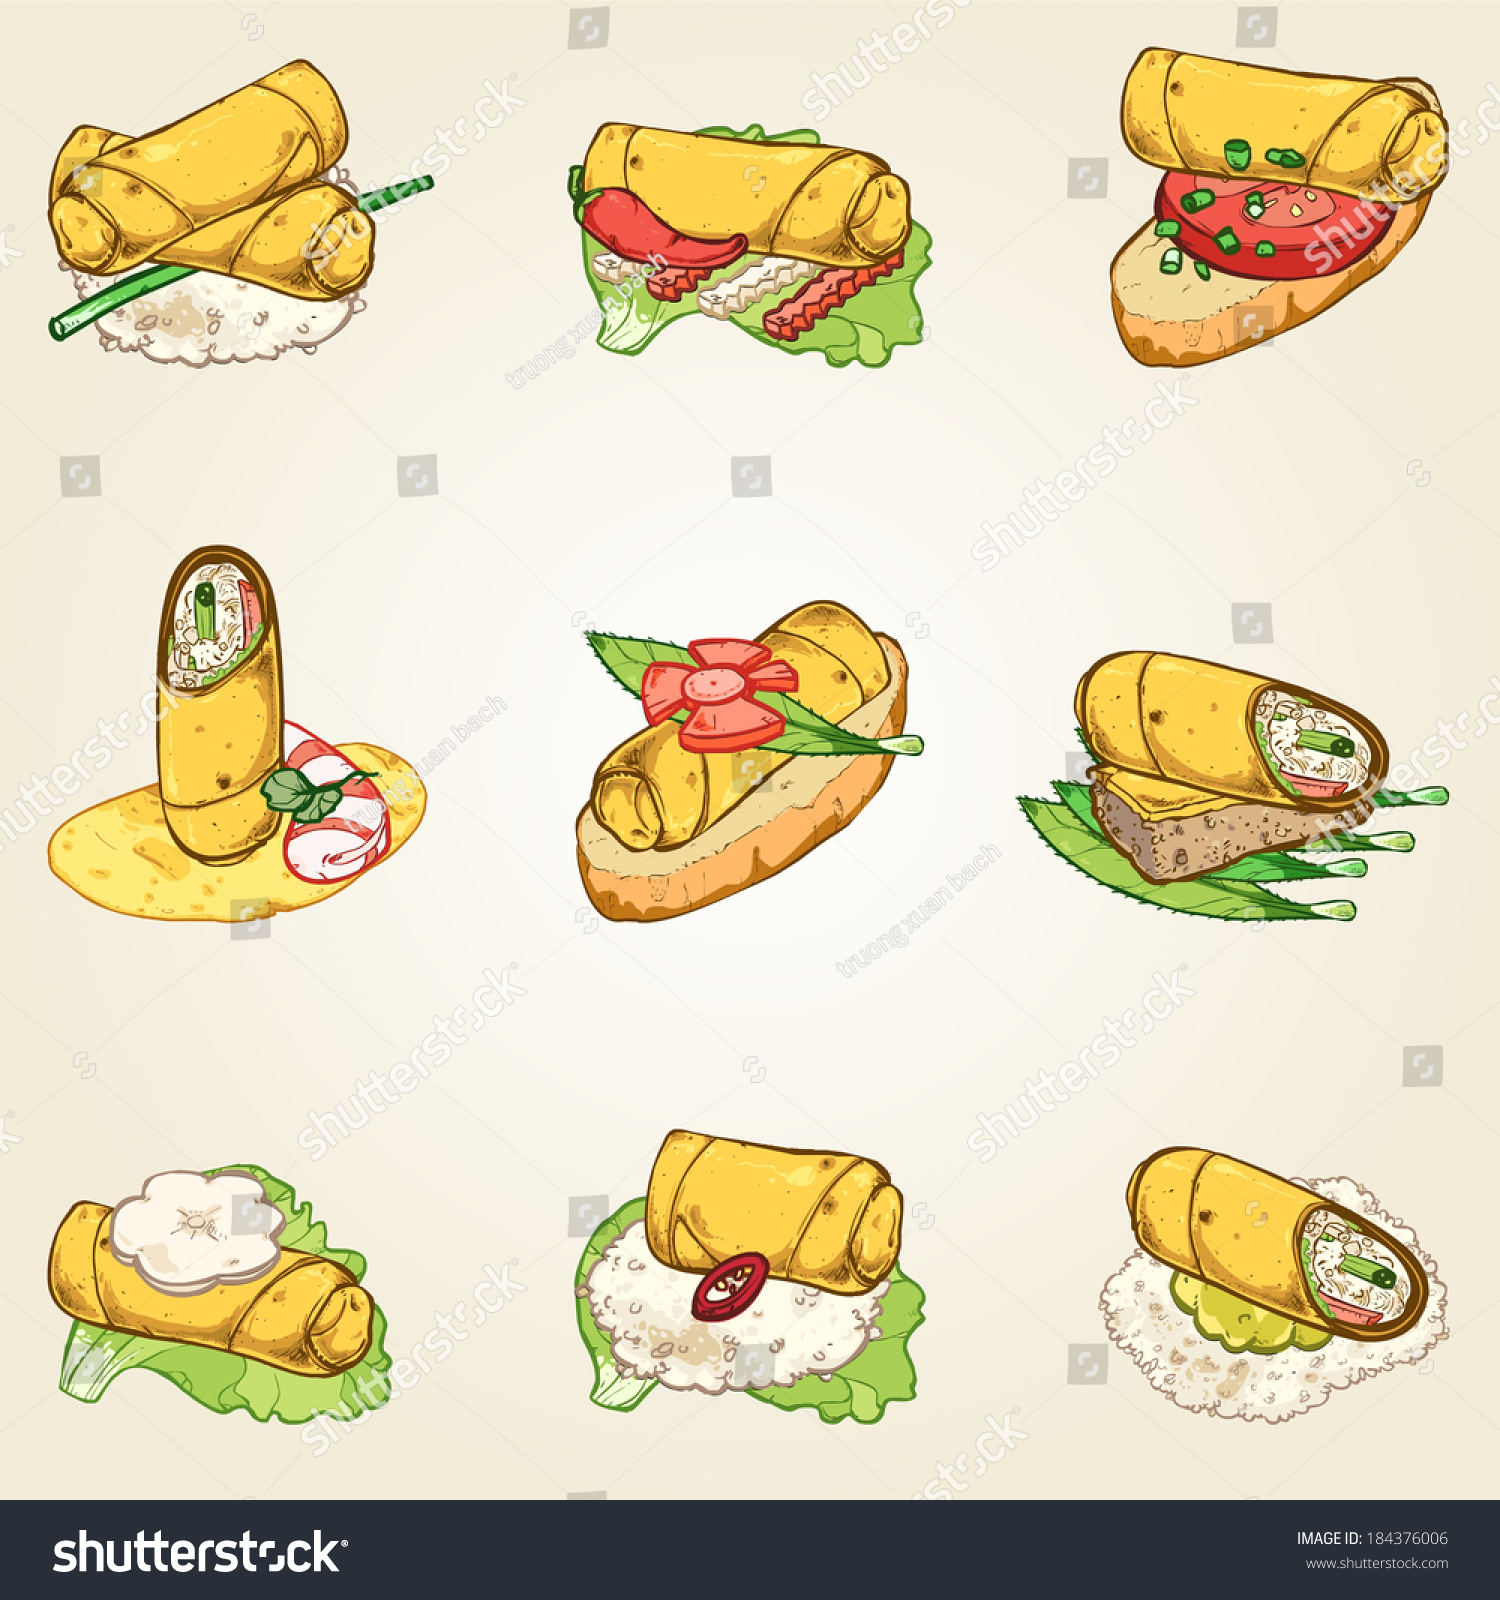 spring roll clipart - photo #15